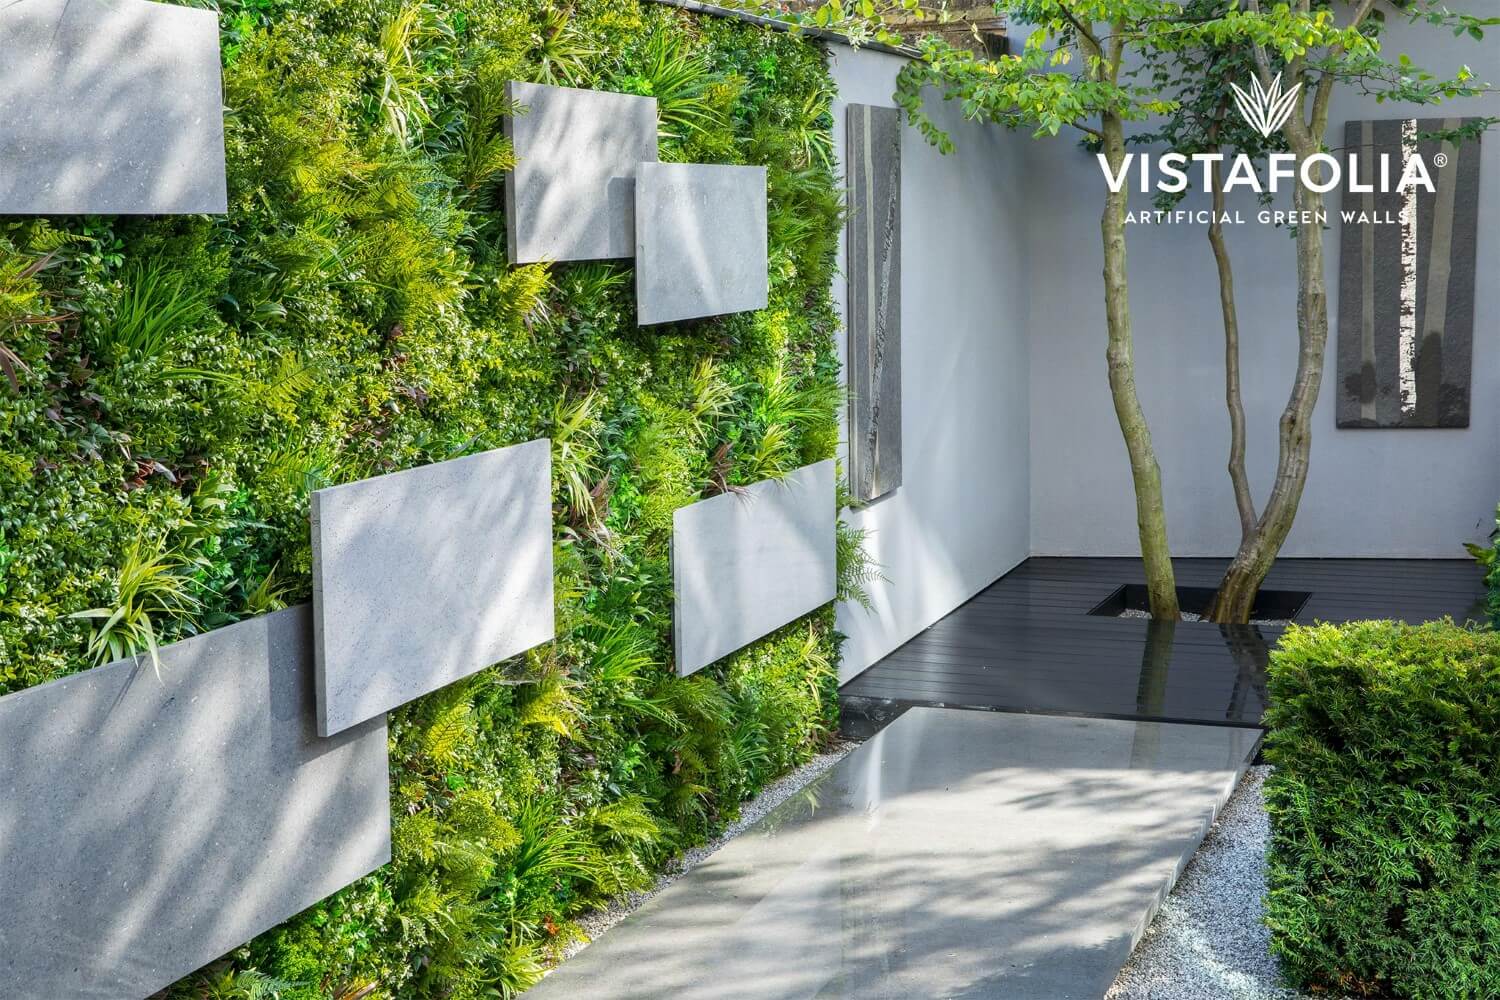 Residential outdoor wall accented with artificial living wall panels